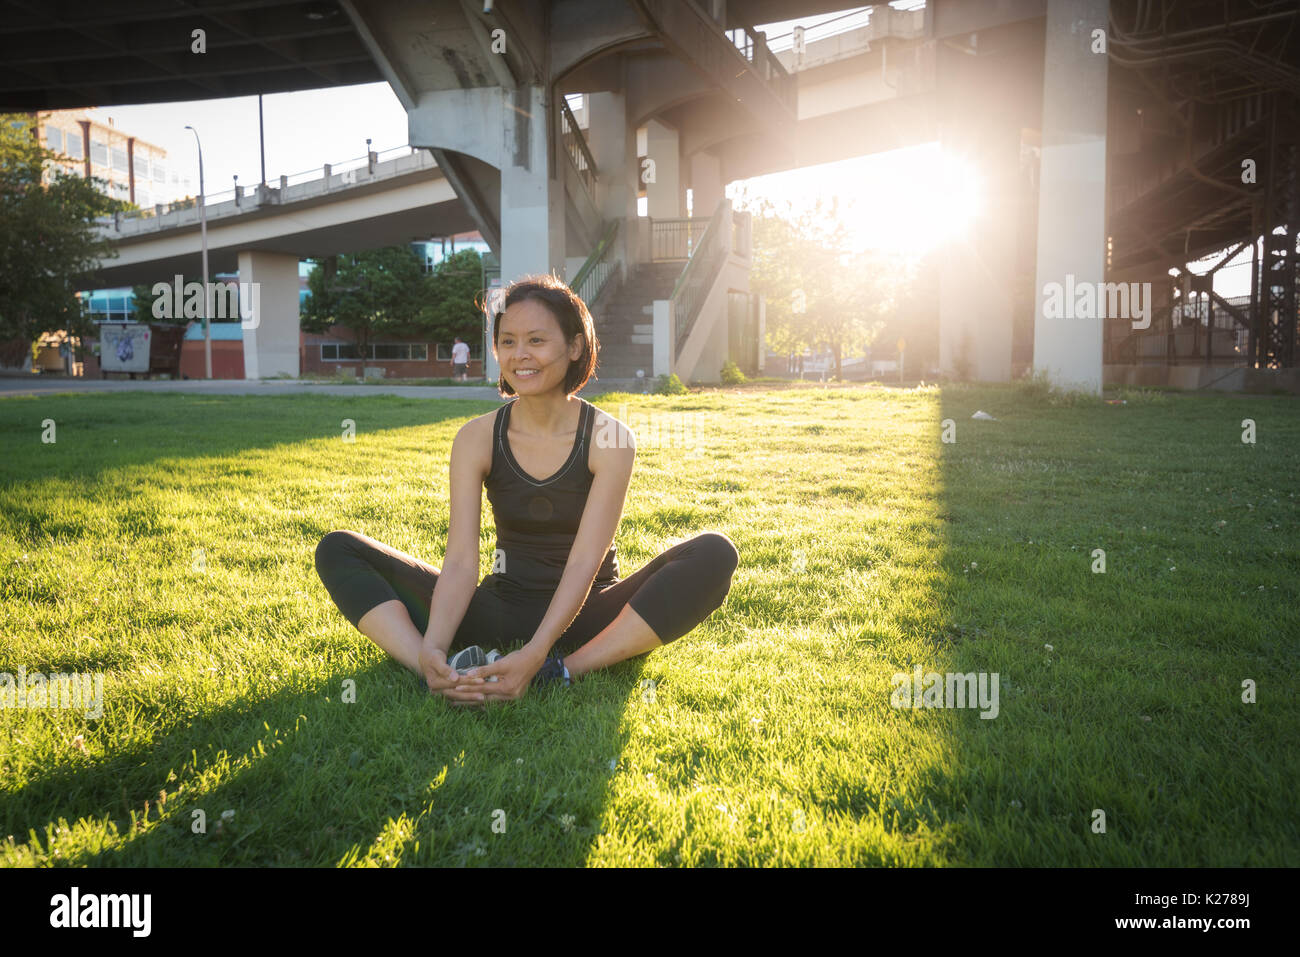 A woman stretches on the grass of a city park. Stock Photo